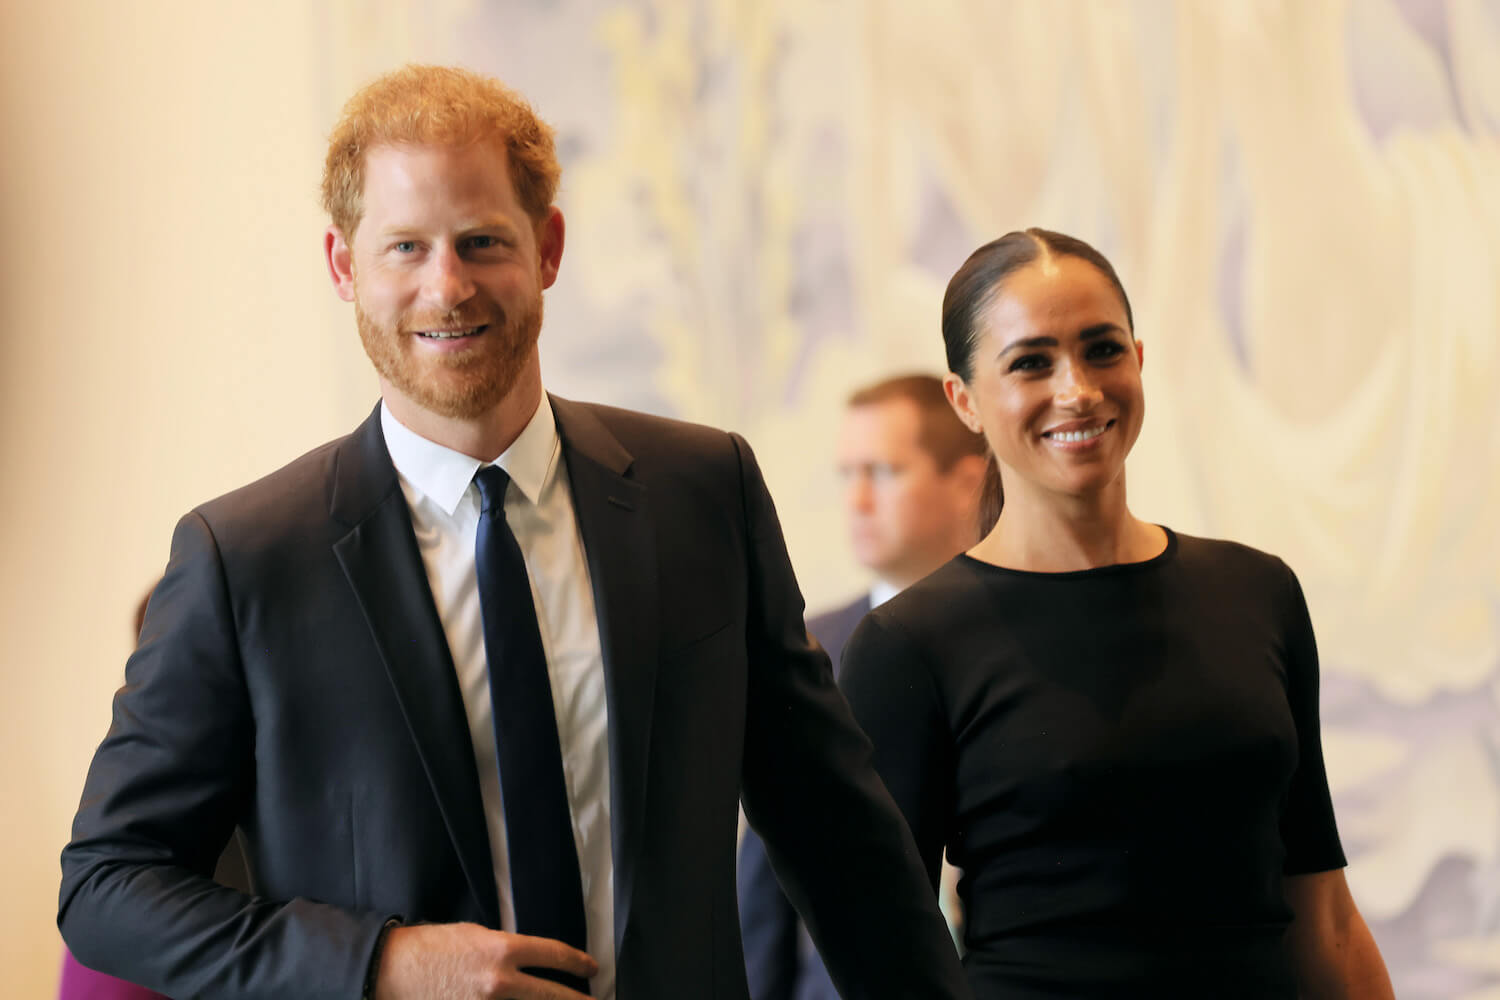 Royal Expert Predicts Prince Harry and Meghan Markle Will Attend King’s Coronation to Stay ‘Relevant’